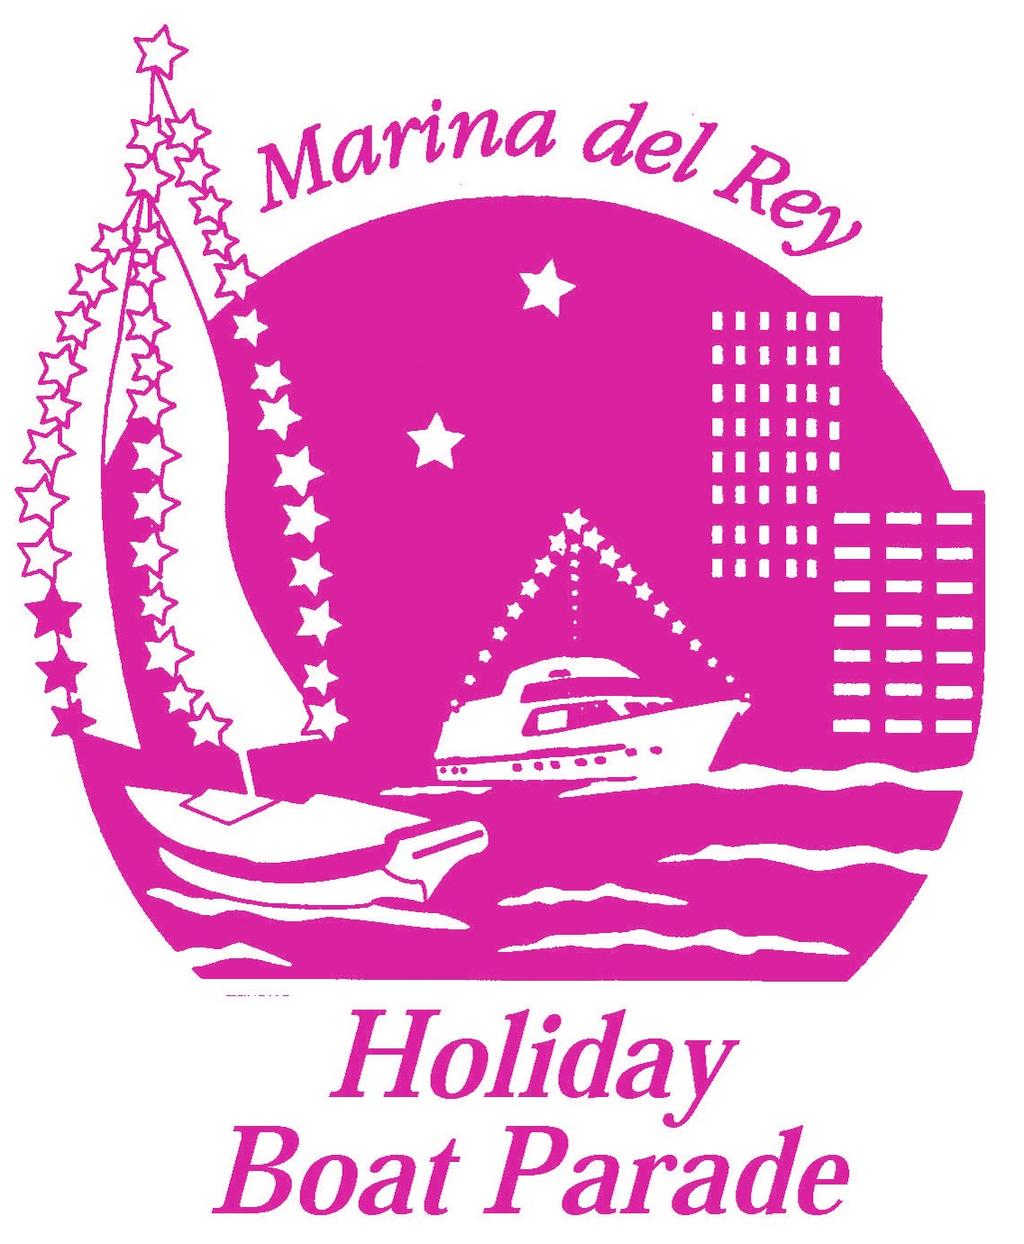 The Marina del Rey Holiday Boat Parade is LA s favorite holiday event on the water! Since 1962, the boat parade has been made possible through the generous support of its sponsors.